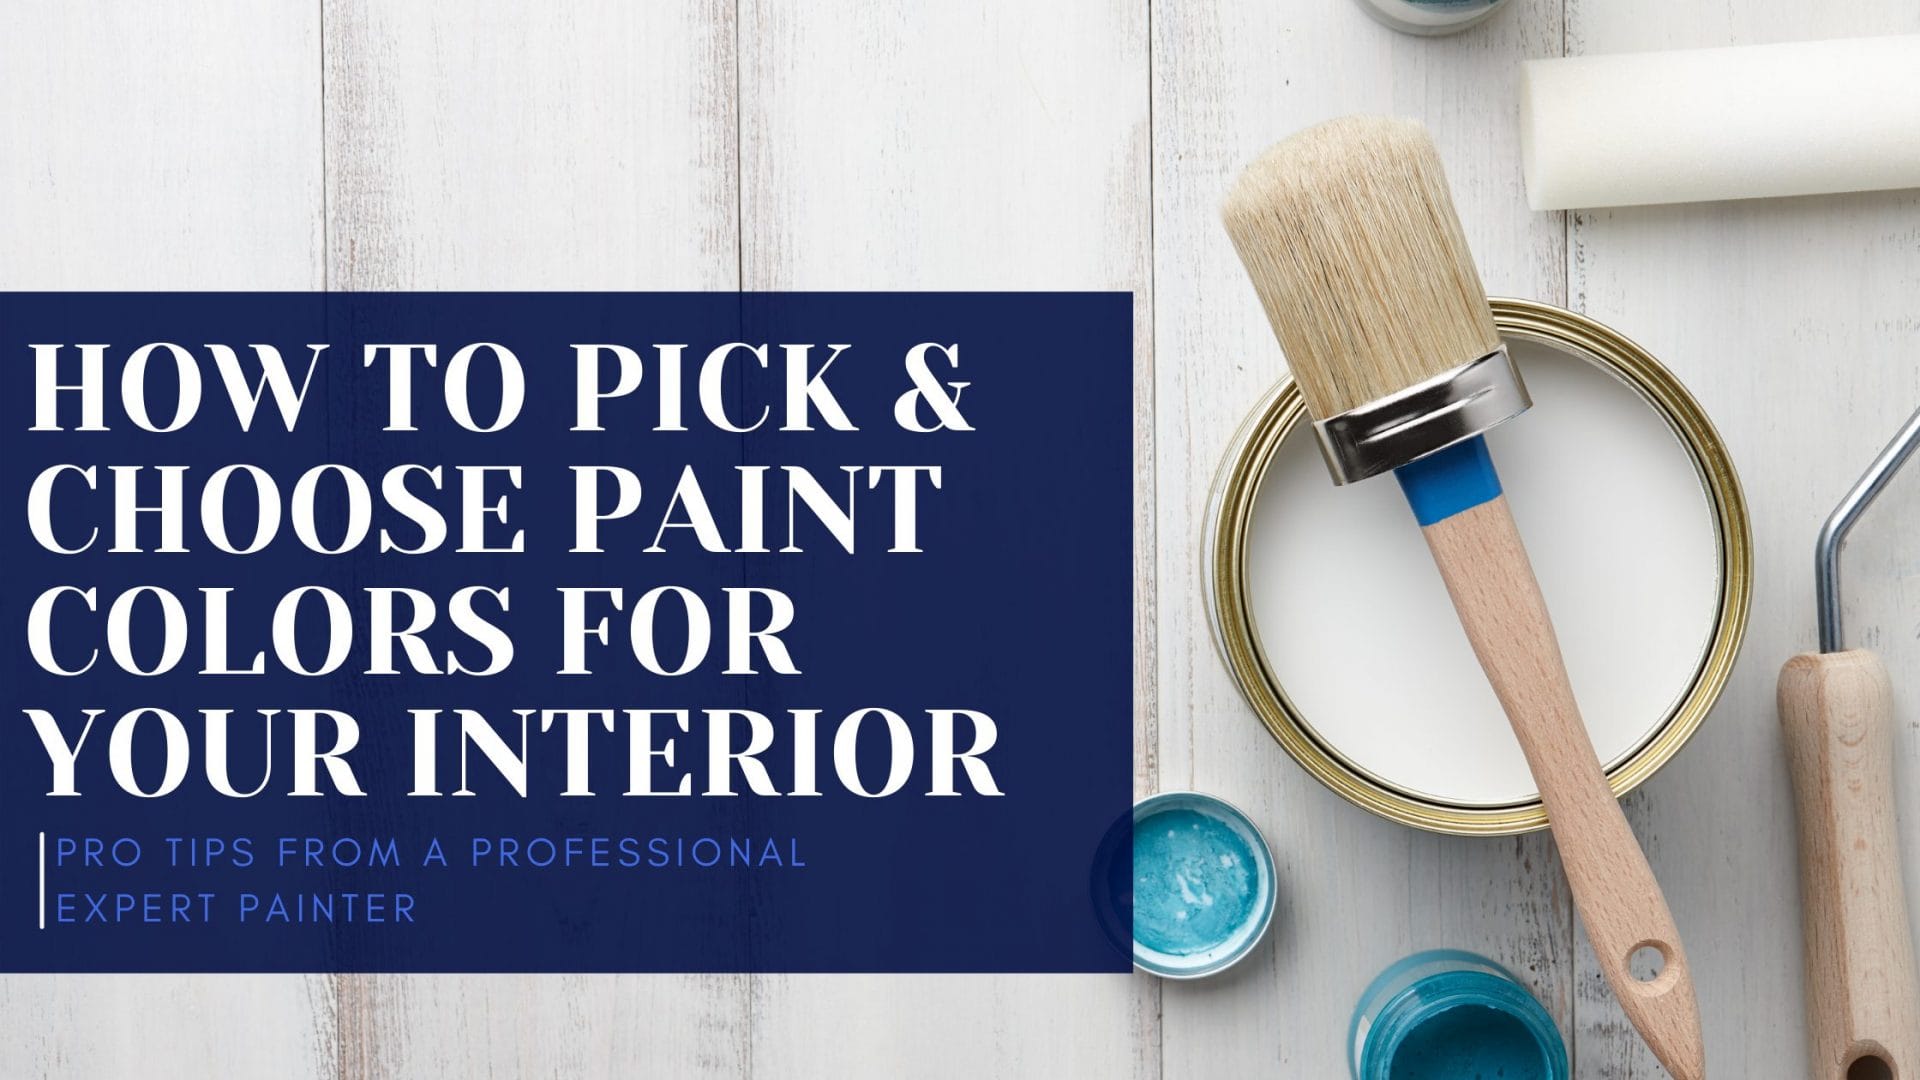 The ultimate guide for how to pick the best interior paint colors